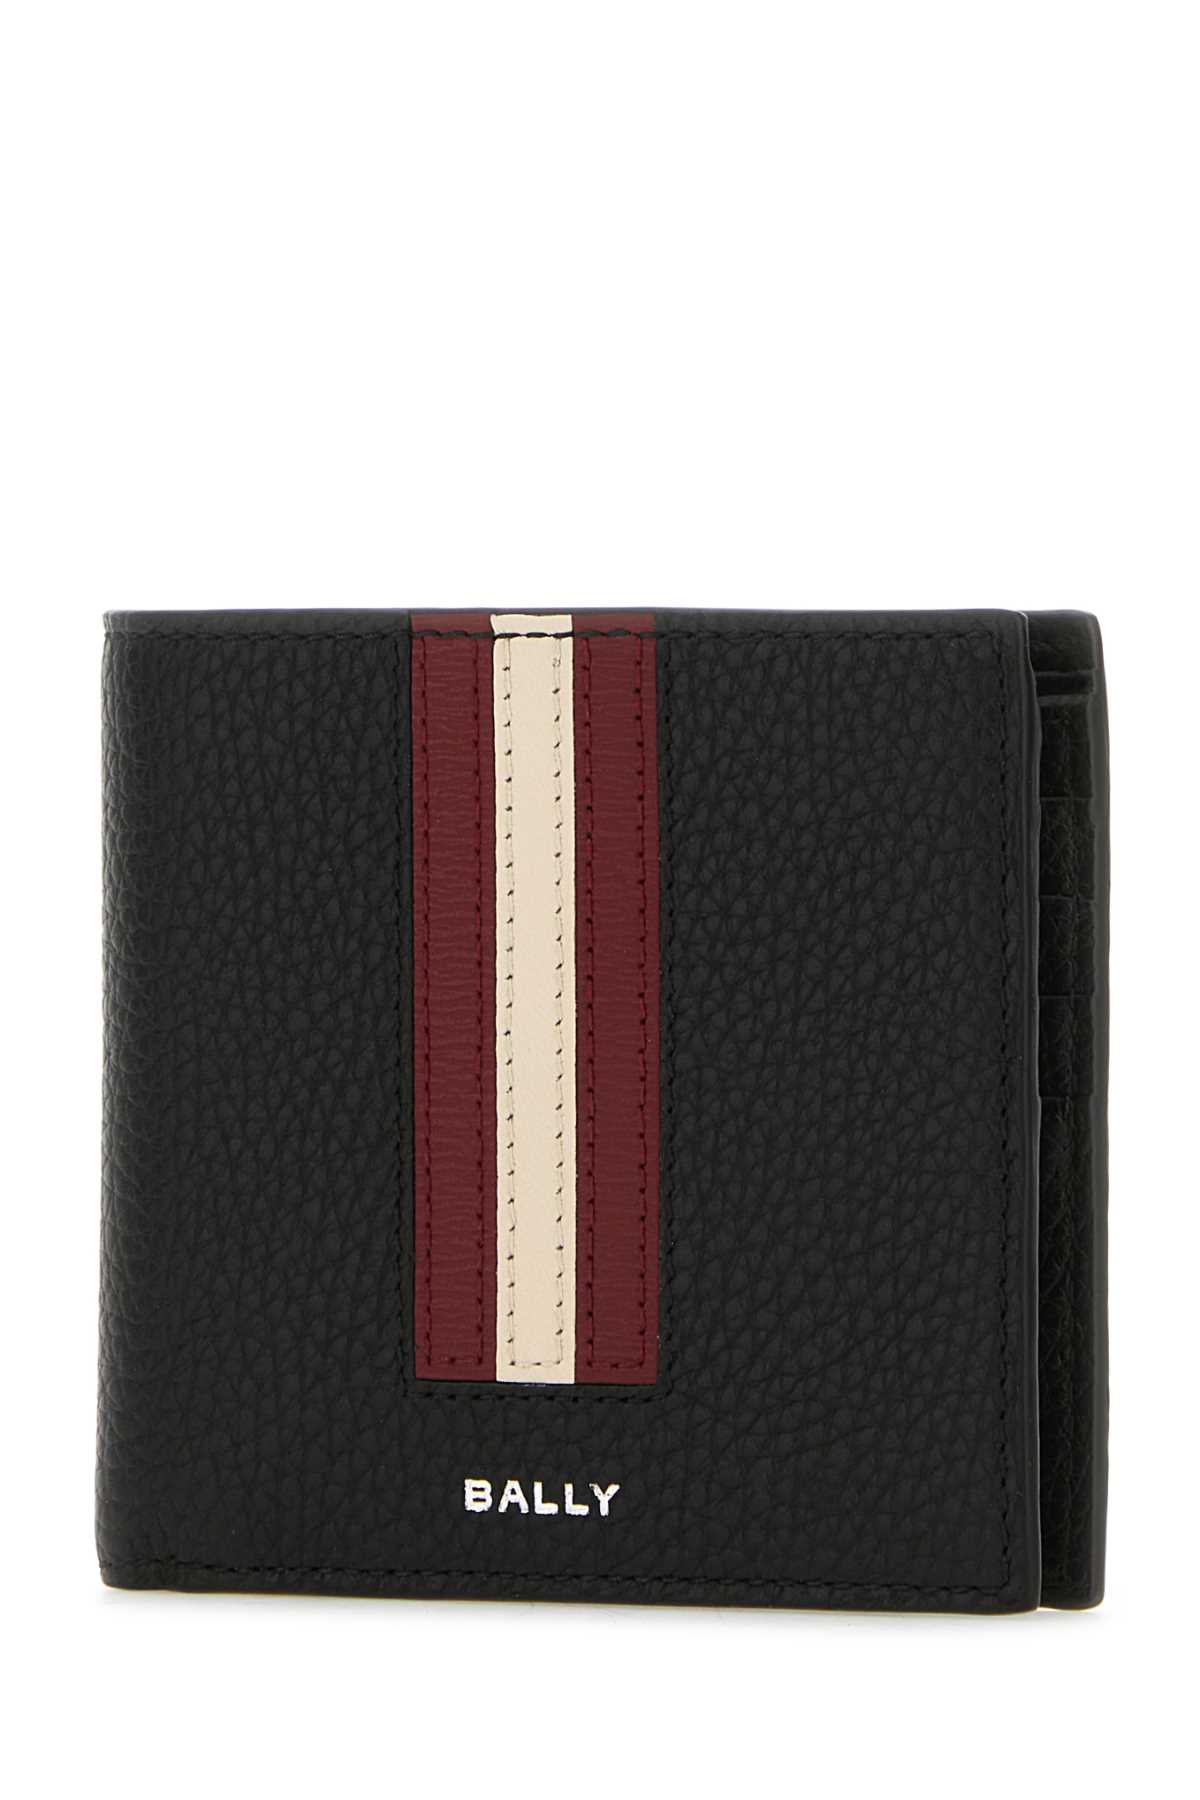 Shop Bally Black Leather Wallet In Blackredpall